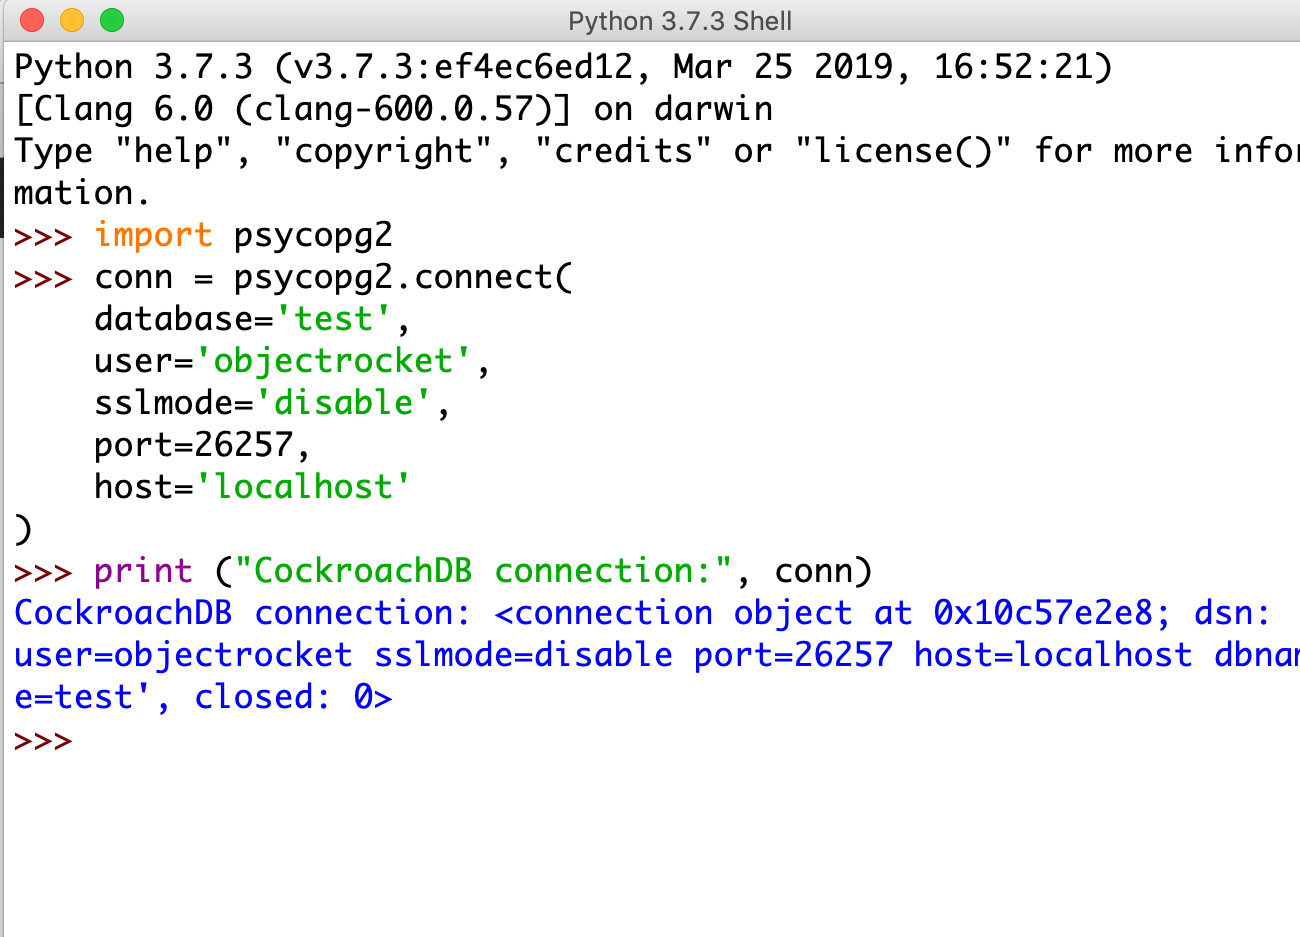 Screenshot of IDLE Python making a connection to a CockroachDB database using psycopg2